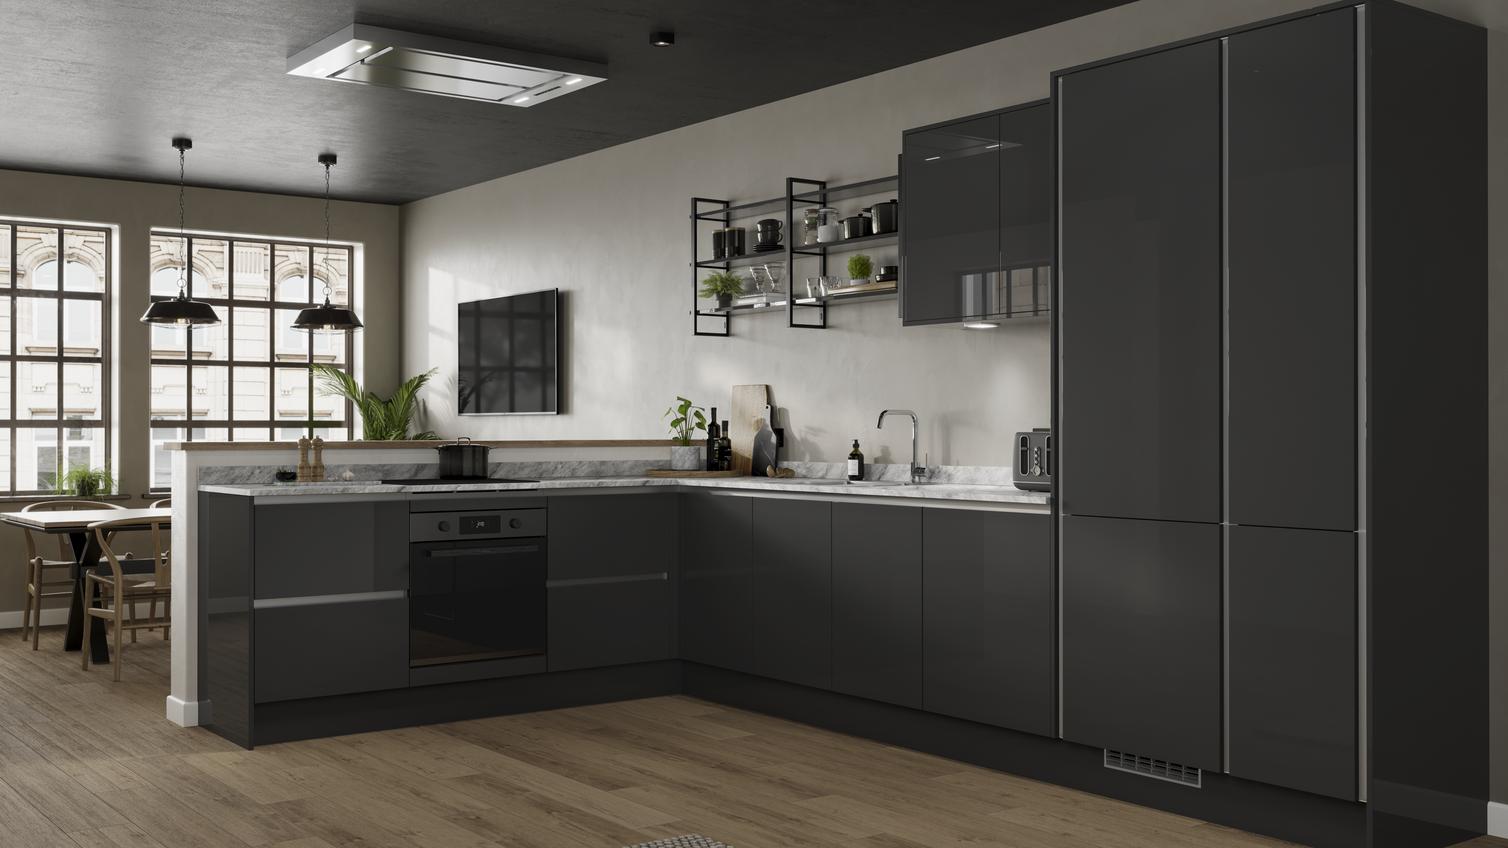 L-shaped kitchen layout with black slab doors in a glossy finish. Has handleless cabinets and silver trims for a modern look.